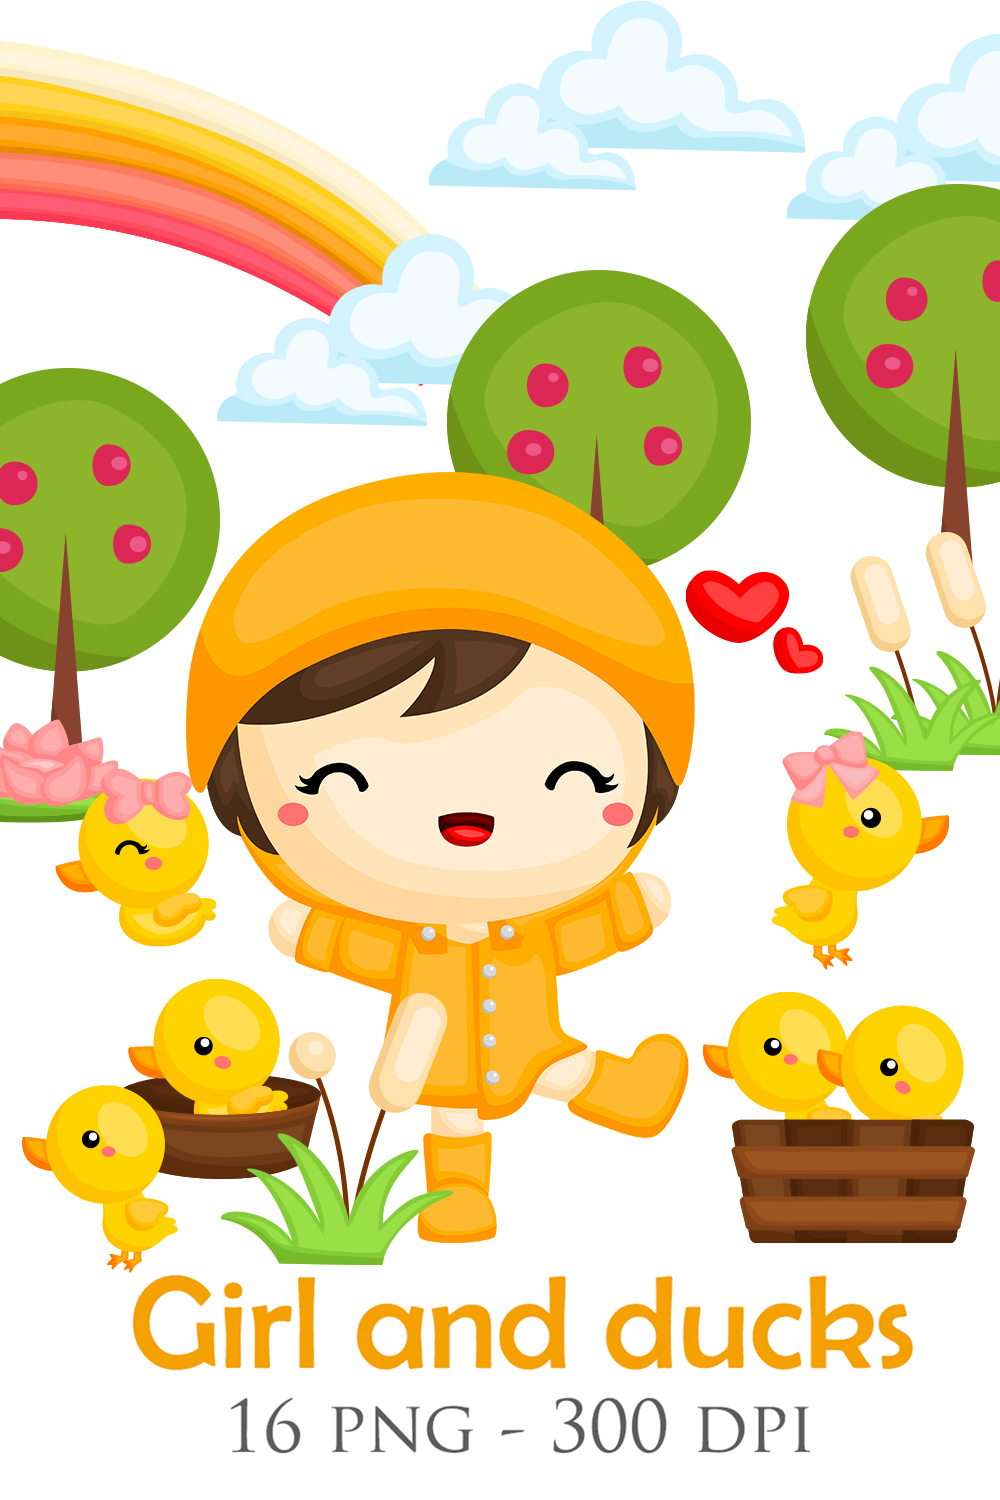 Cute and Happy Girls Kids and Animal Ducks Playing Activity Park Garden Nature in Yellow Theme Background Art Cartoon Illustration Vector Clipart Sticker Decoration pinterest preview image.